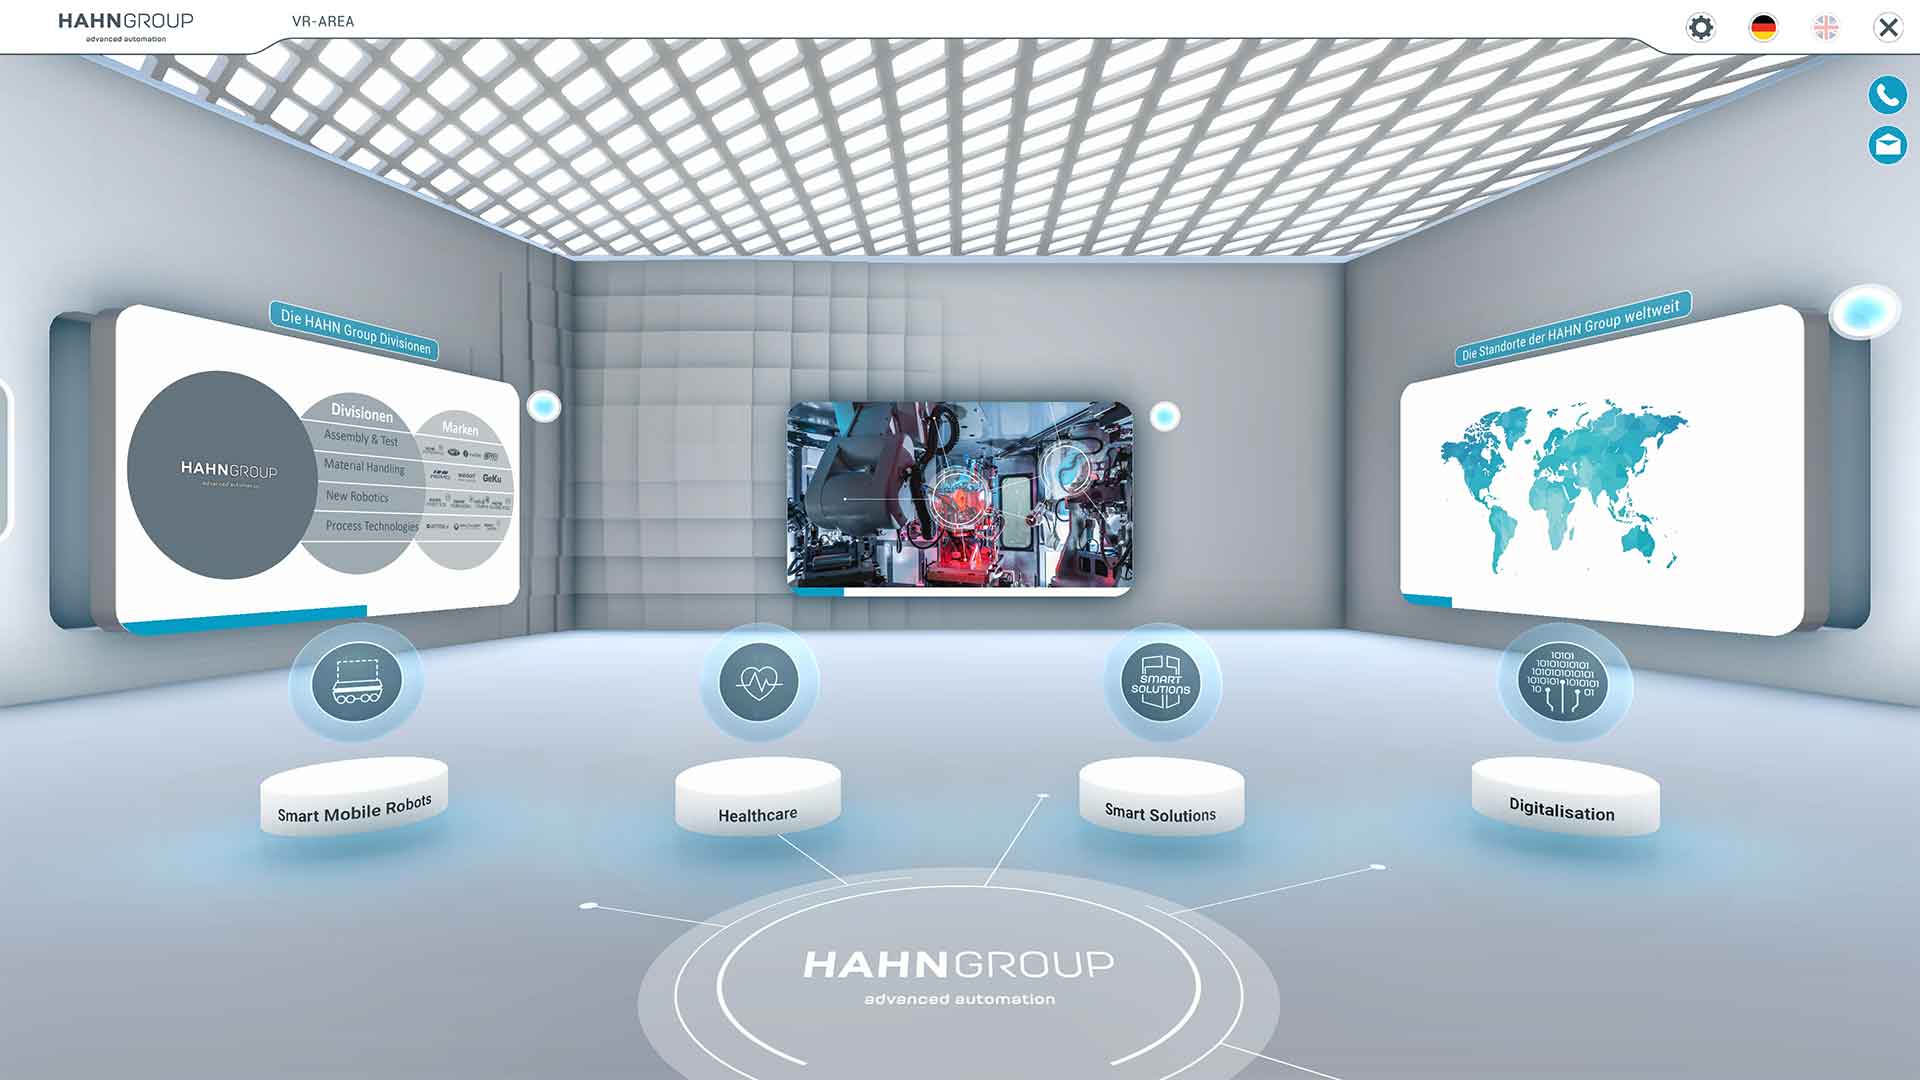 The HAHN Group’s virtual showroom features videos, interactive 3D models that can be rotated freely as well as many other interactive elements.